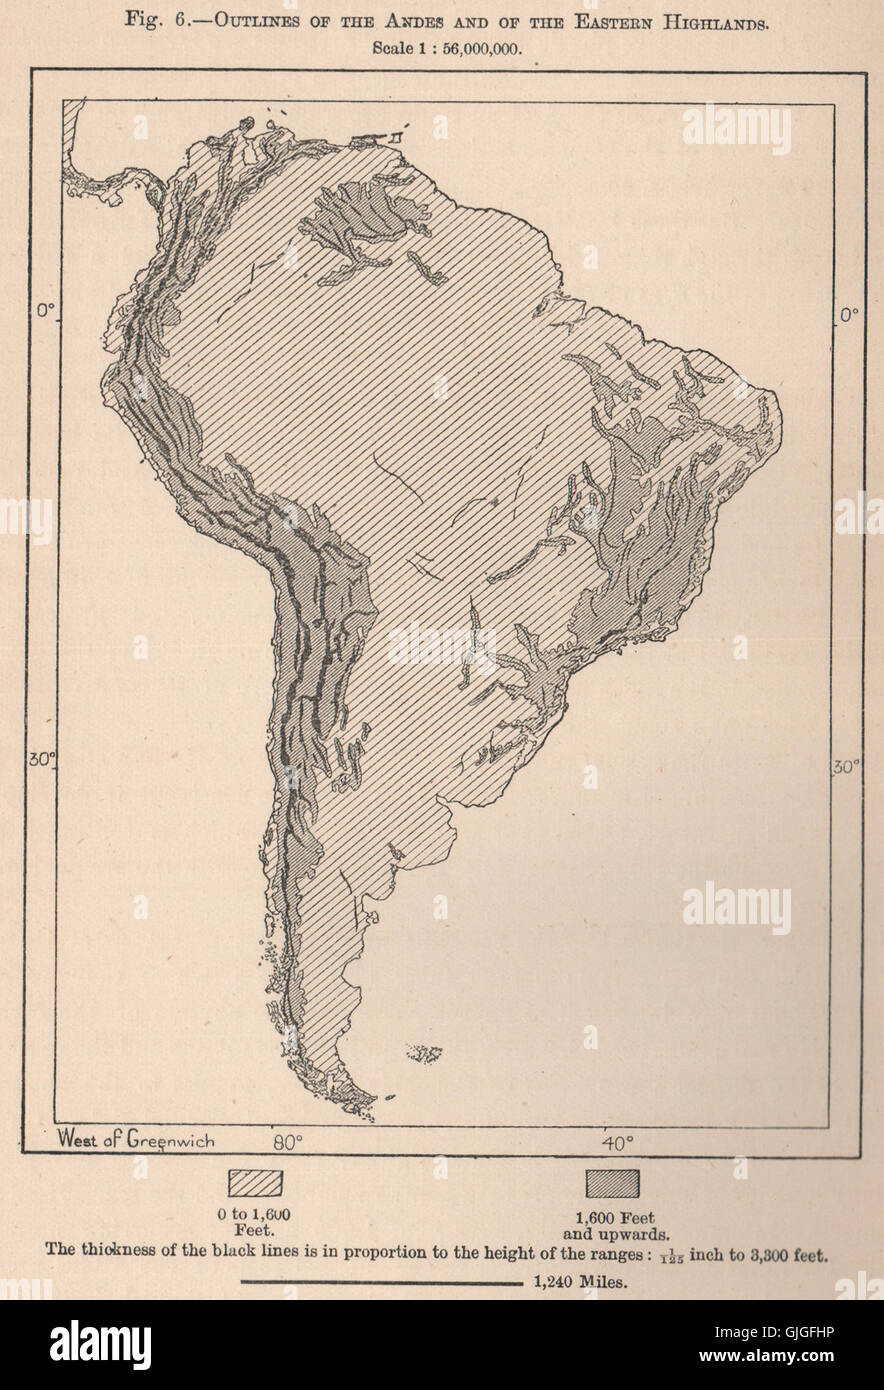 Outlines of the Andes and of the Eastern Highlands. South America, 1885 map Stock Photo